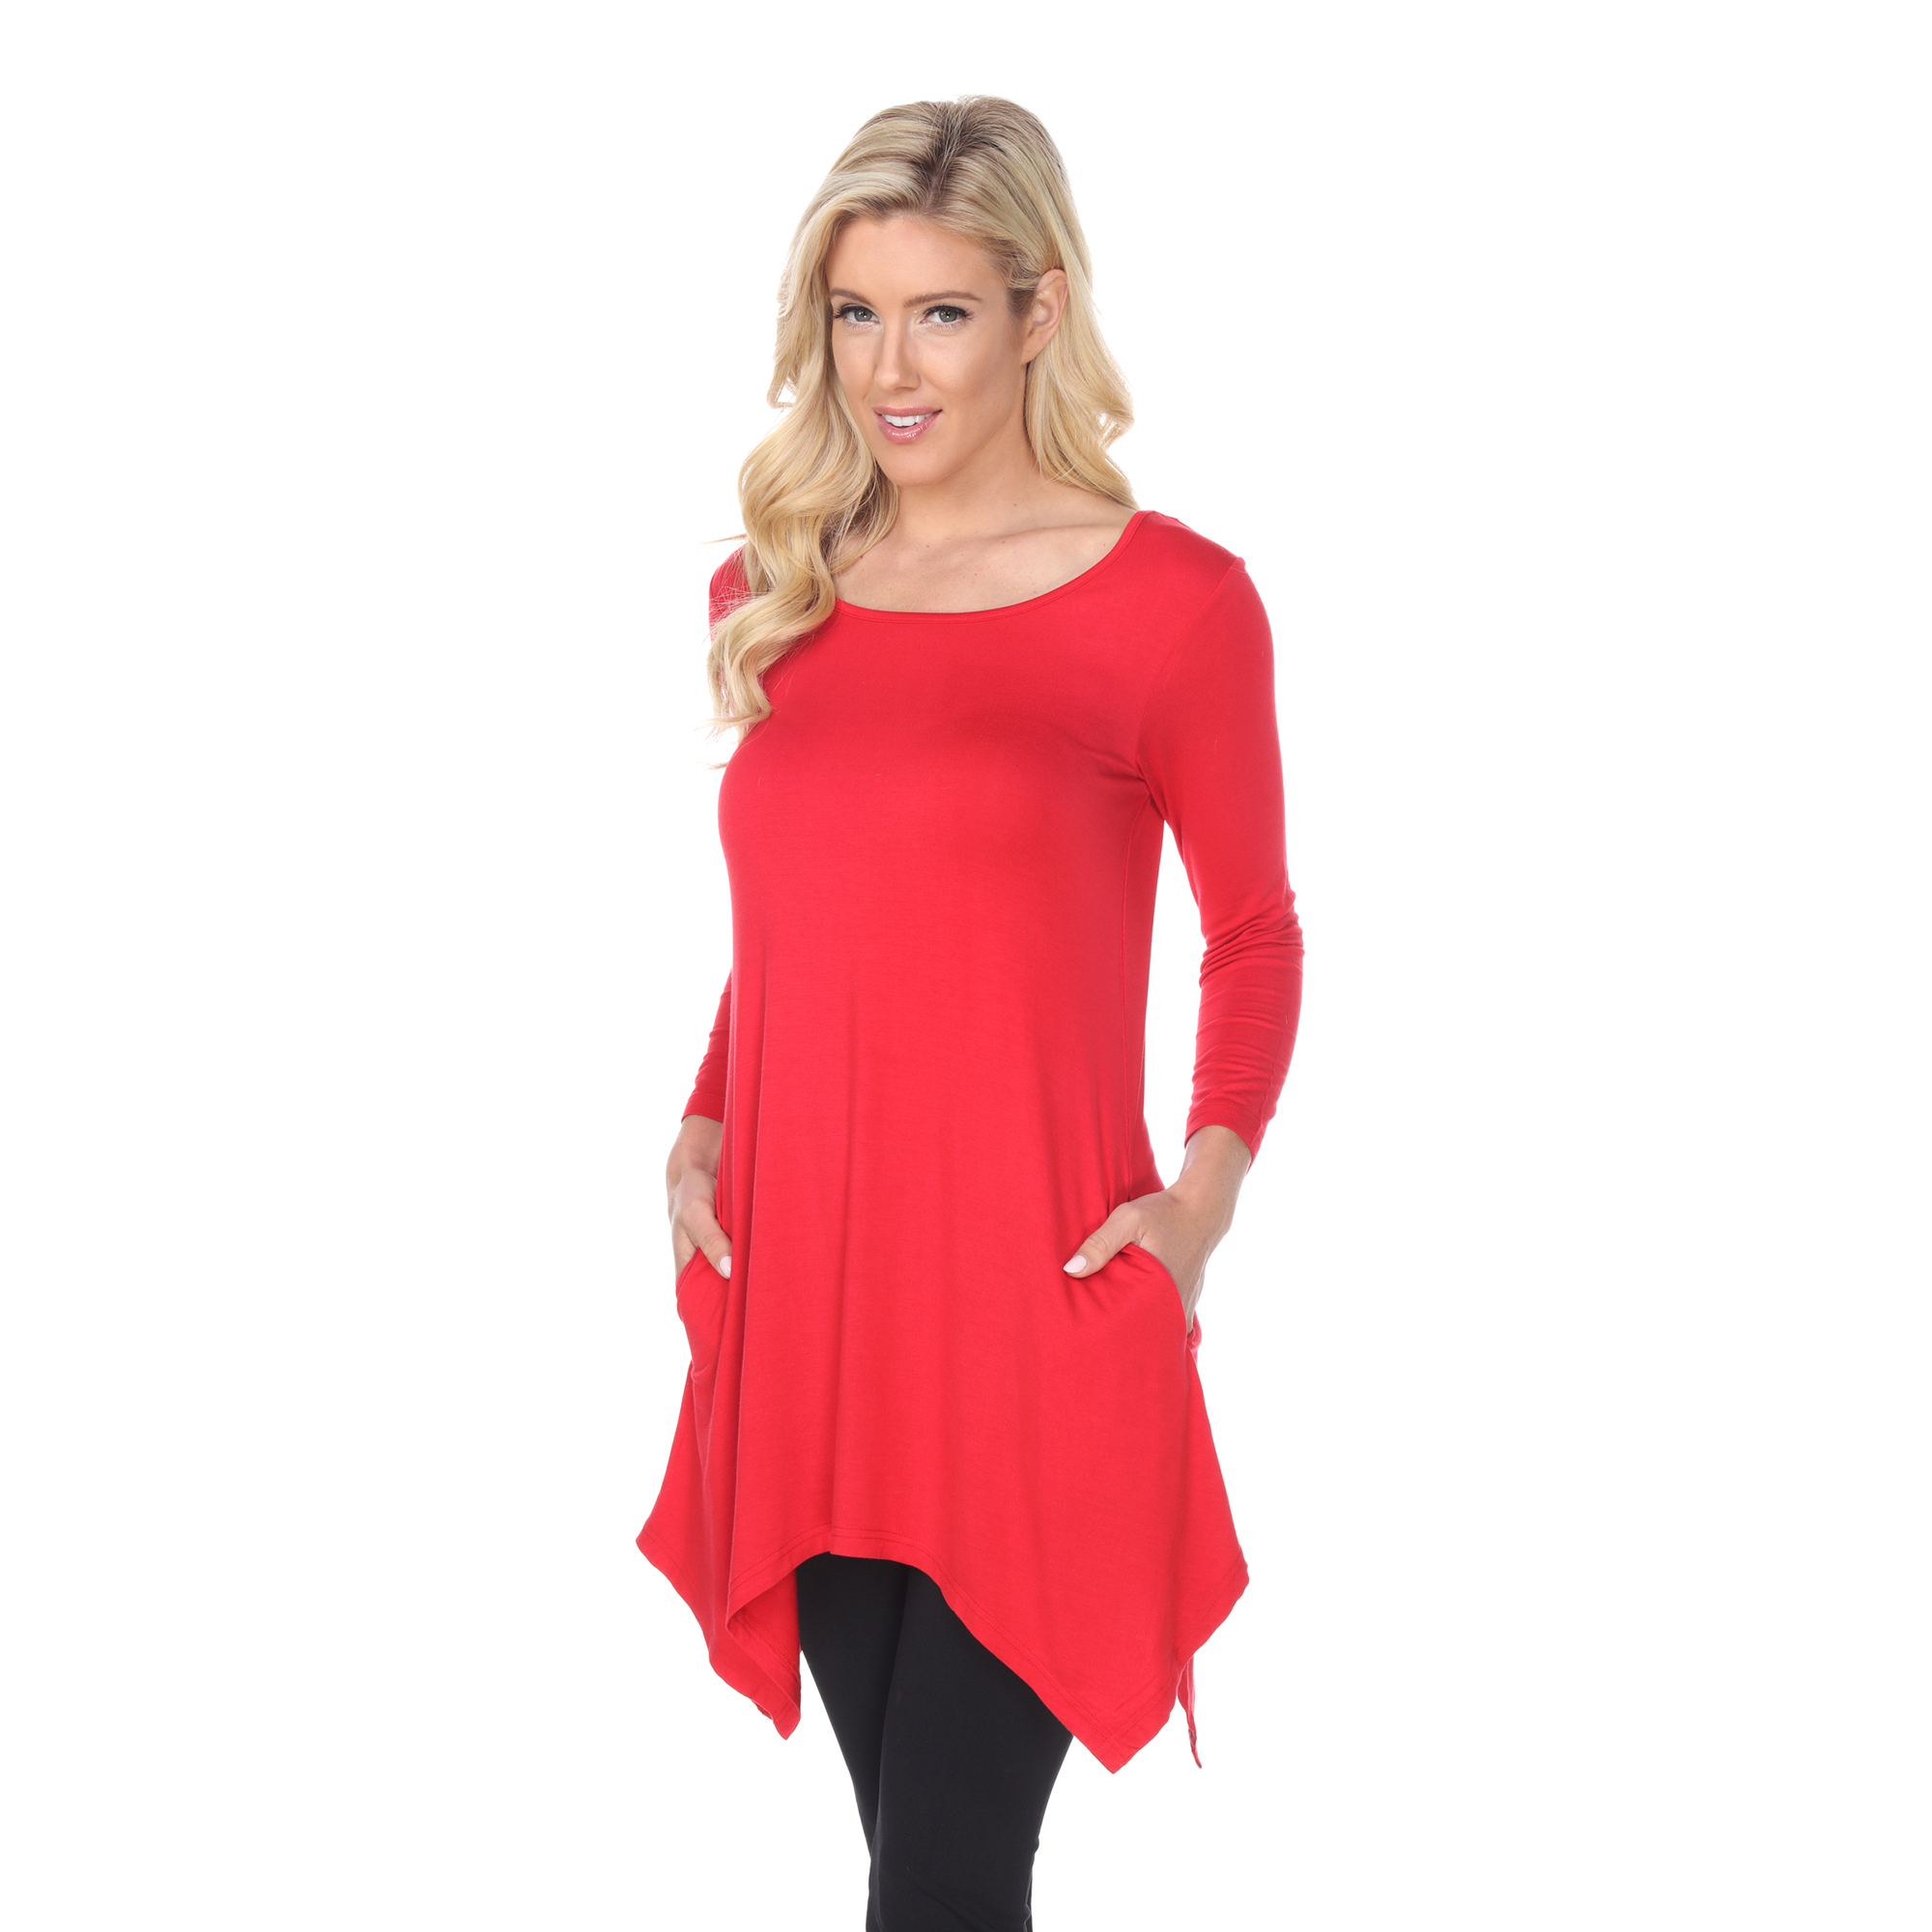 White Mark Women's Quarter Sleeve Tunic Top With Pockets - Red, Small